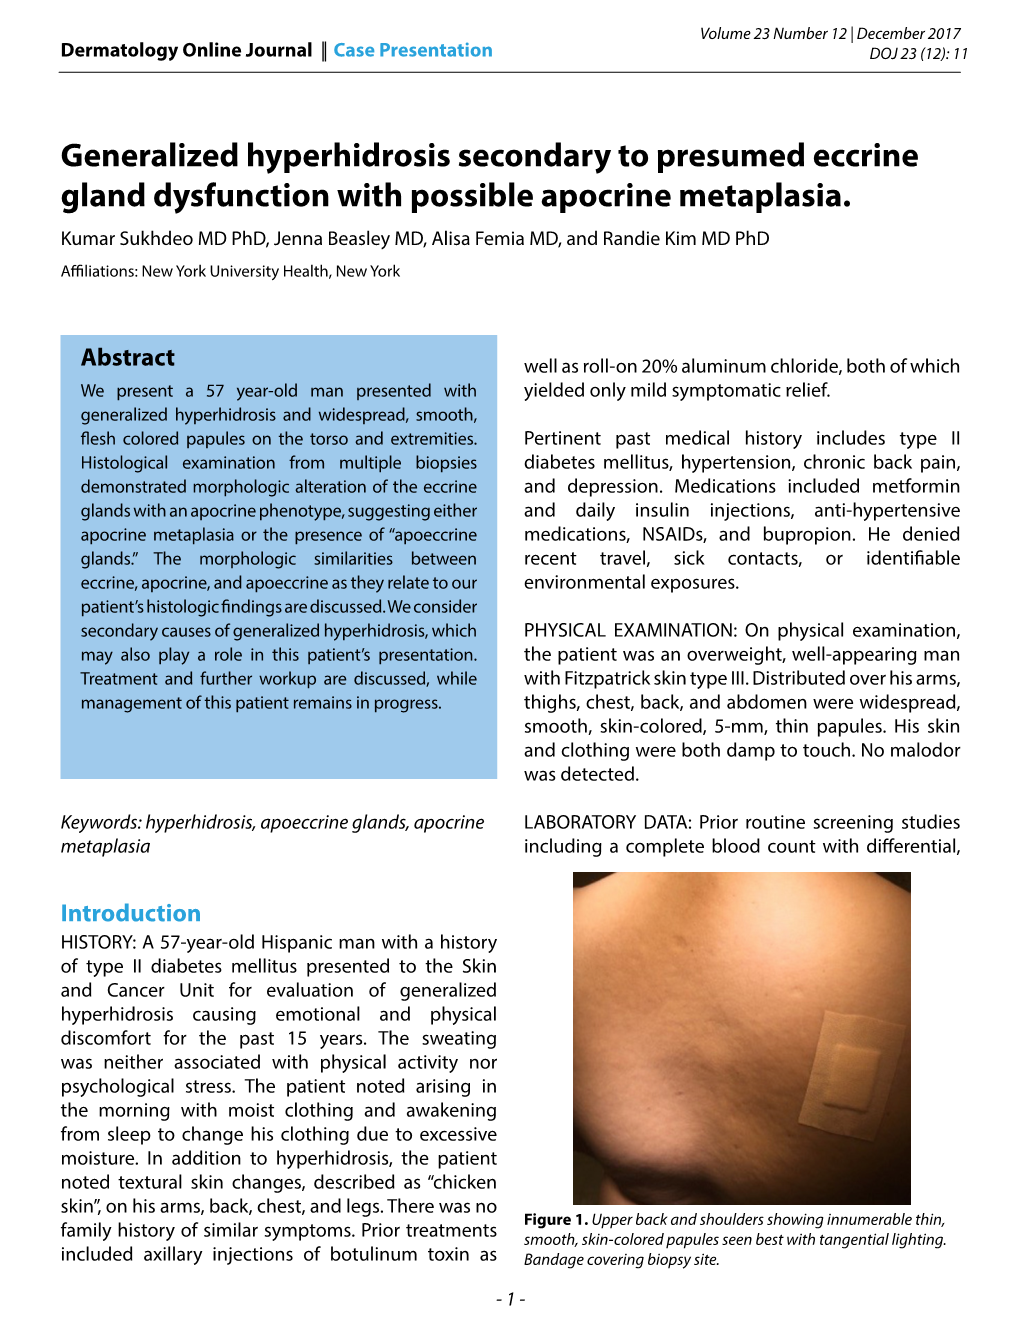 Generalized Hyperhidrosis Secondary to Presumed Eccrine Gland Dysfunction with Possible Apocrine Metaplasia